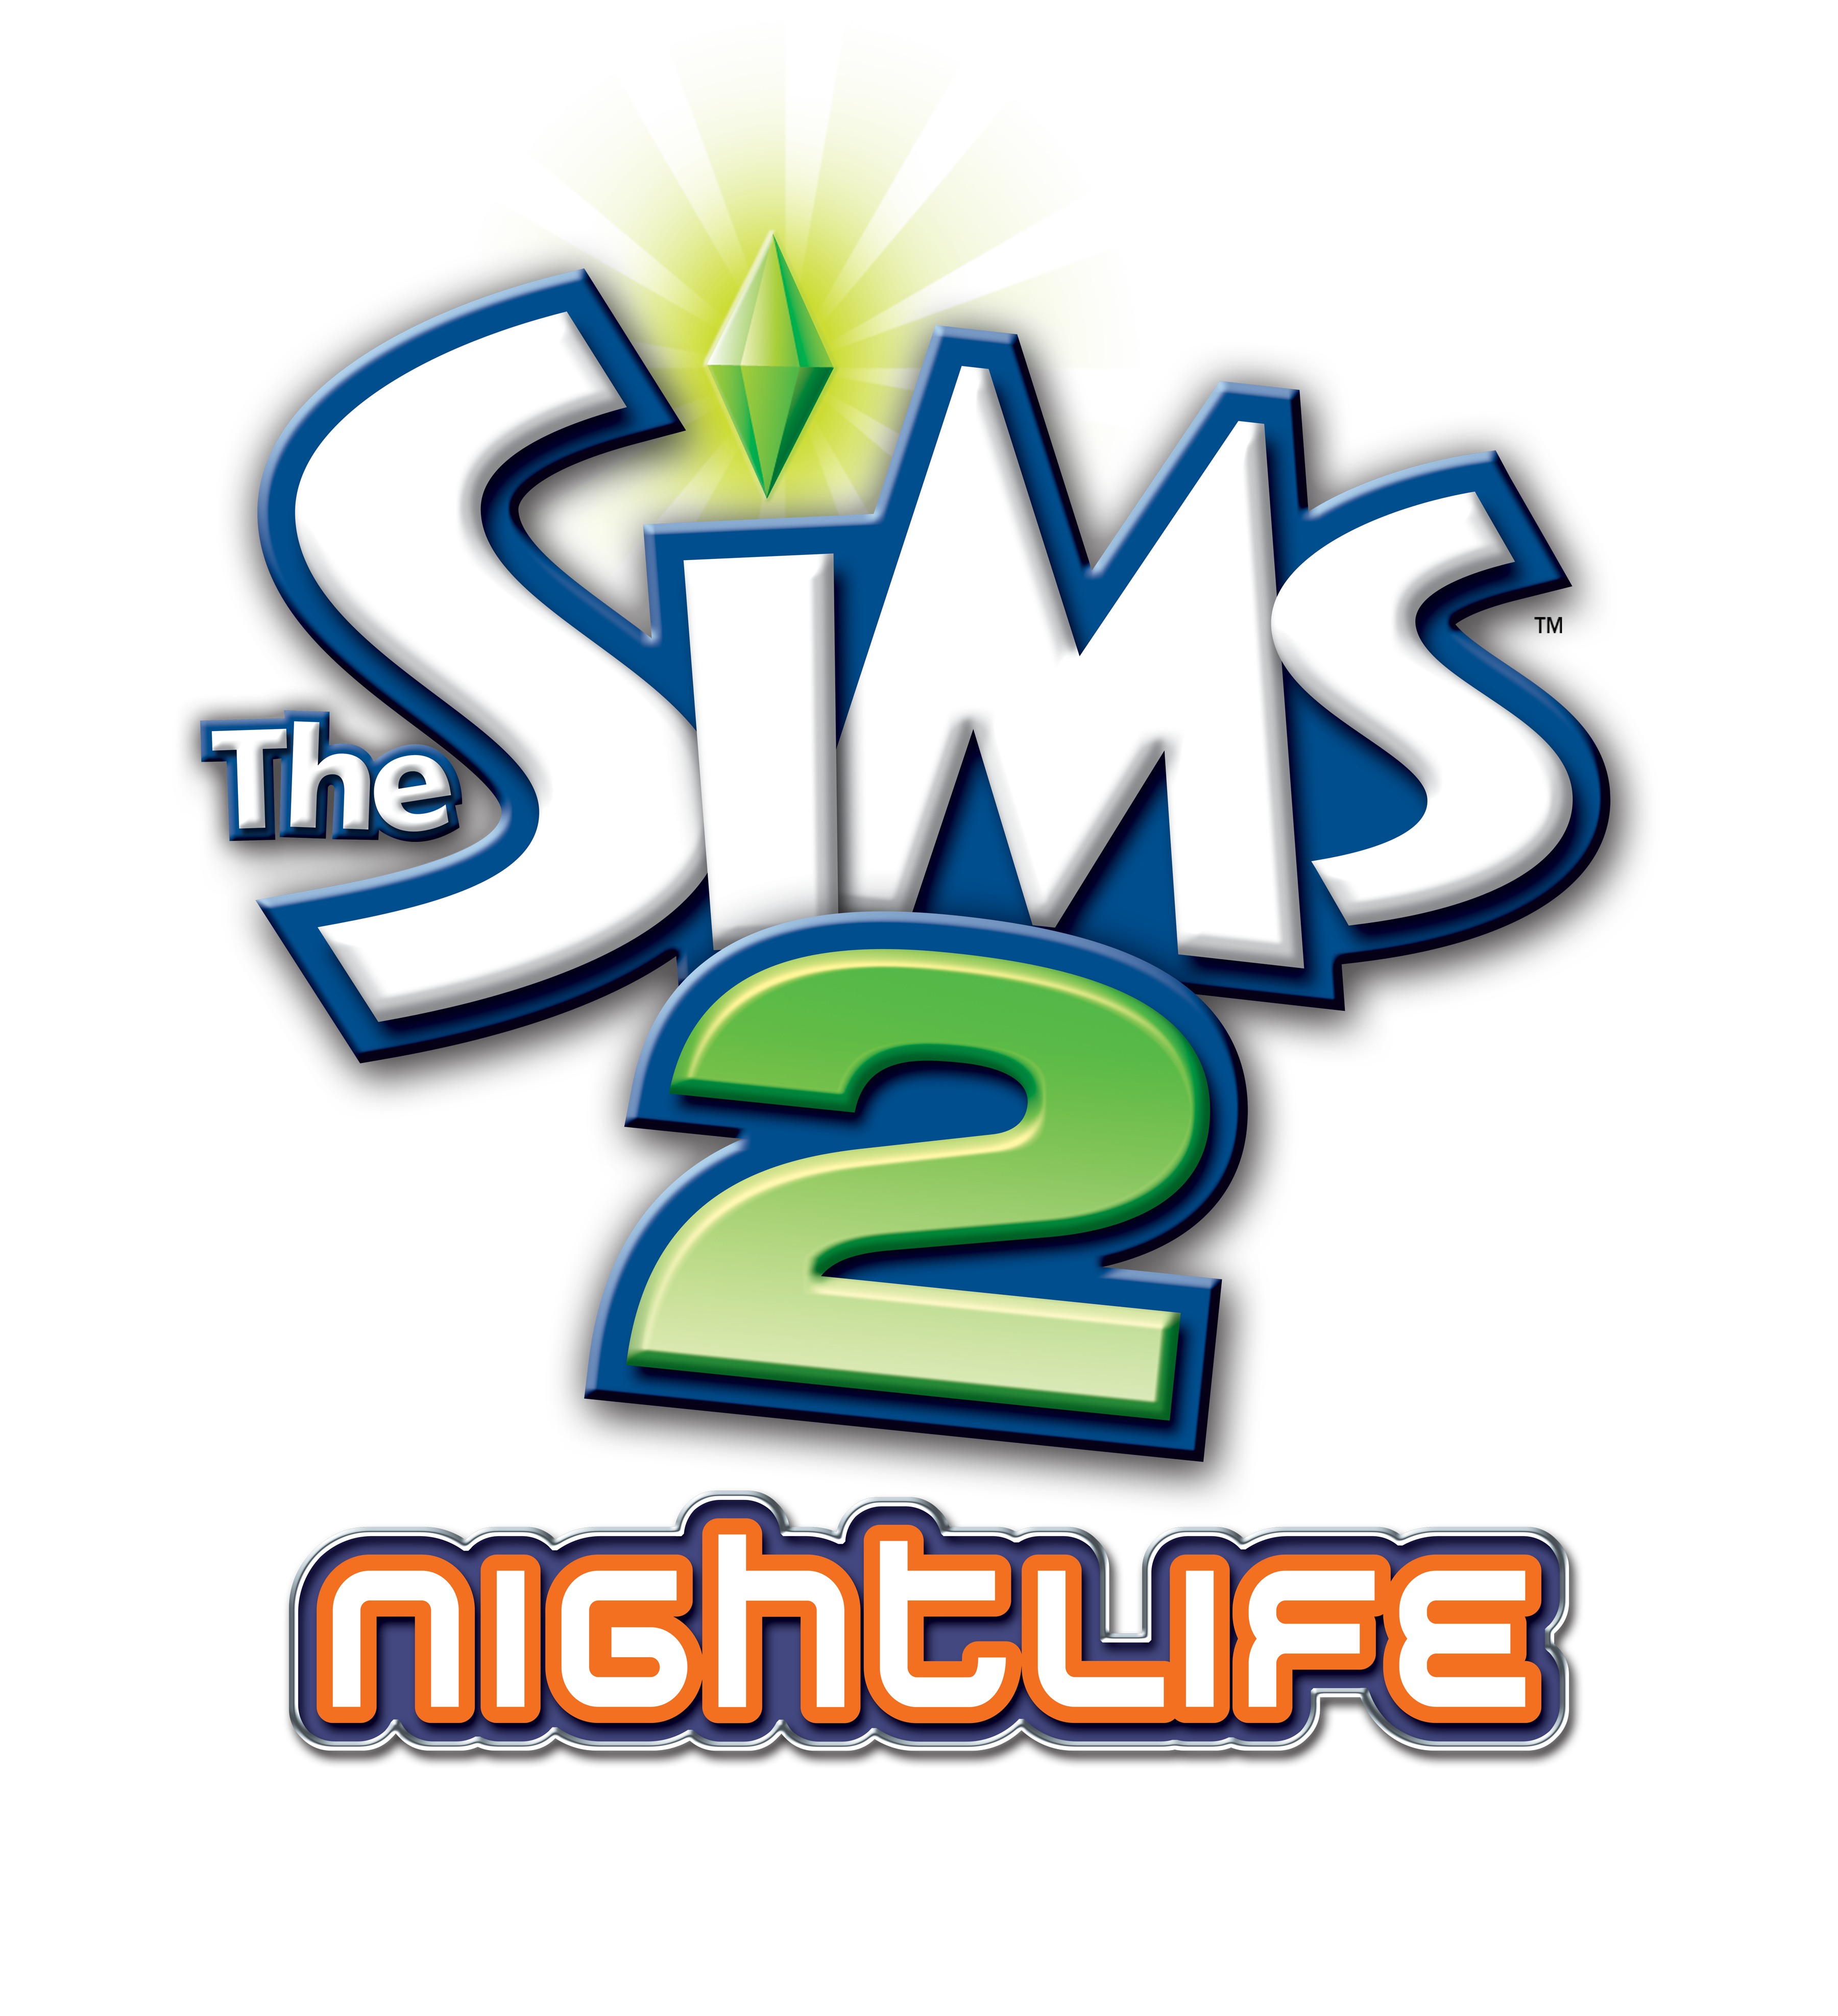 the sims 2 nightlife